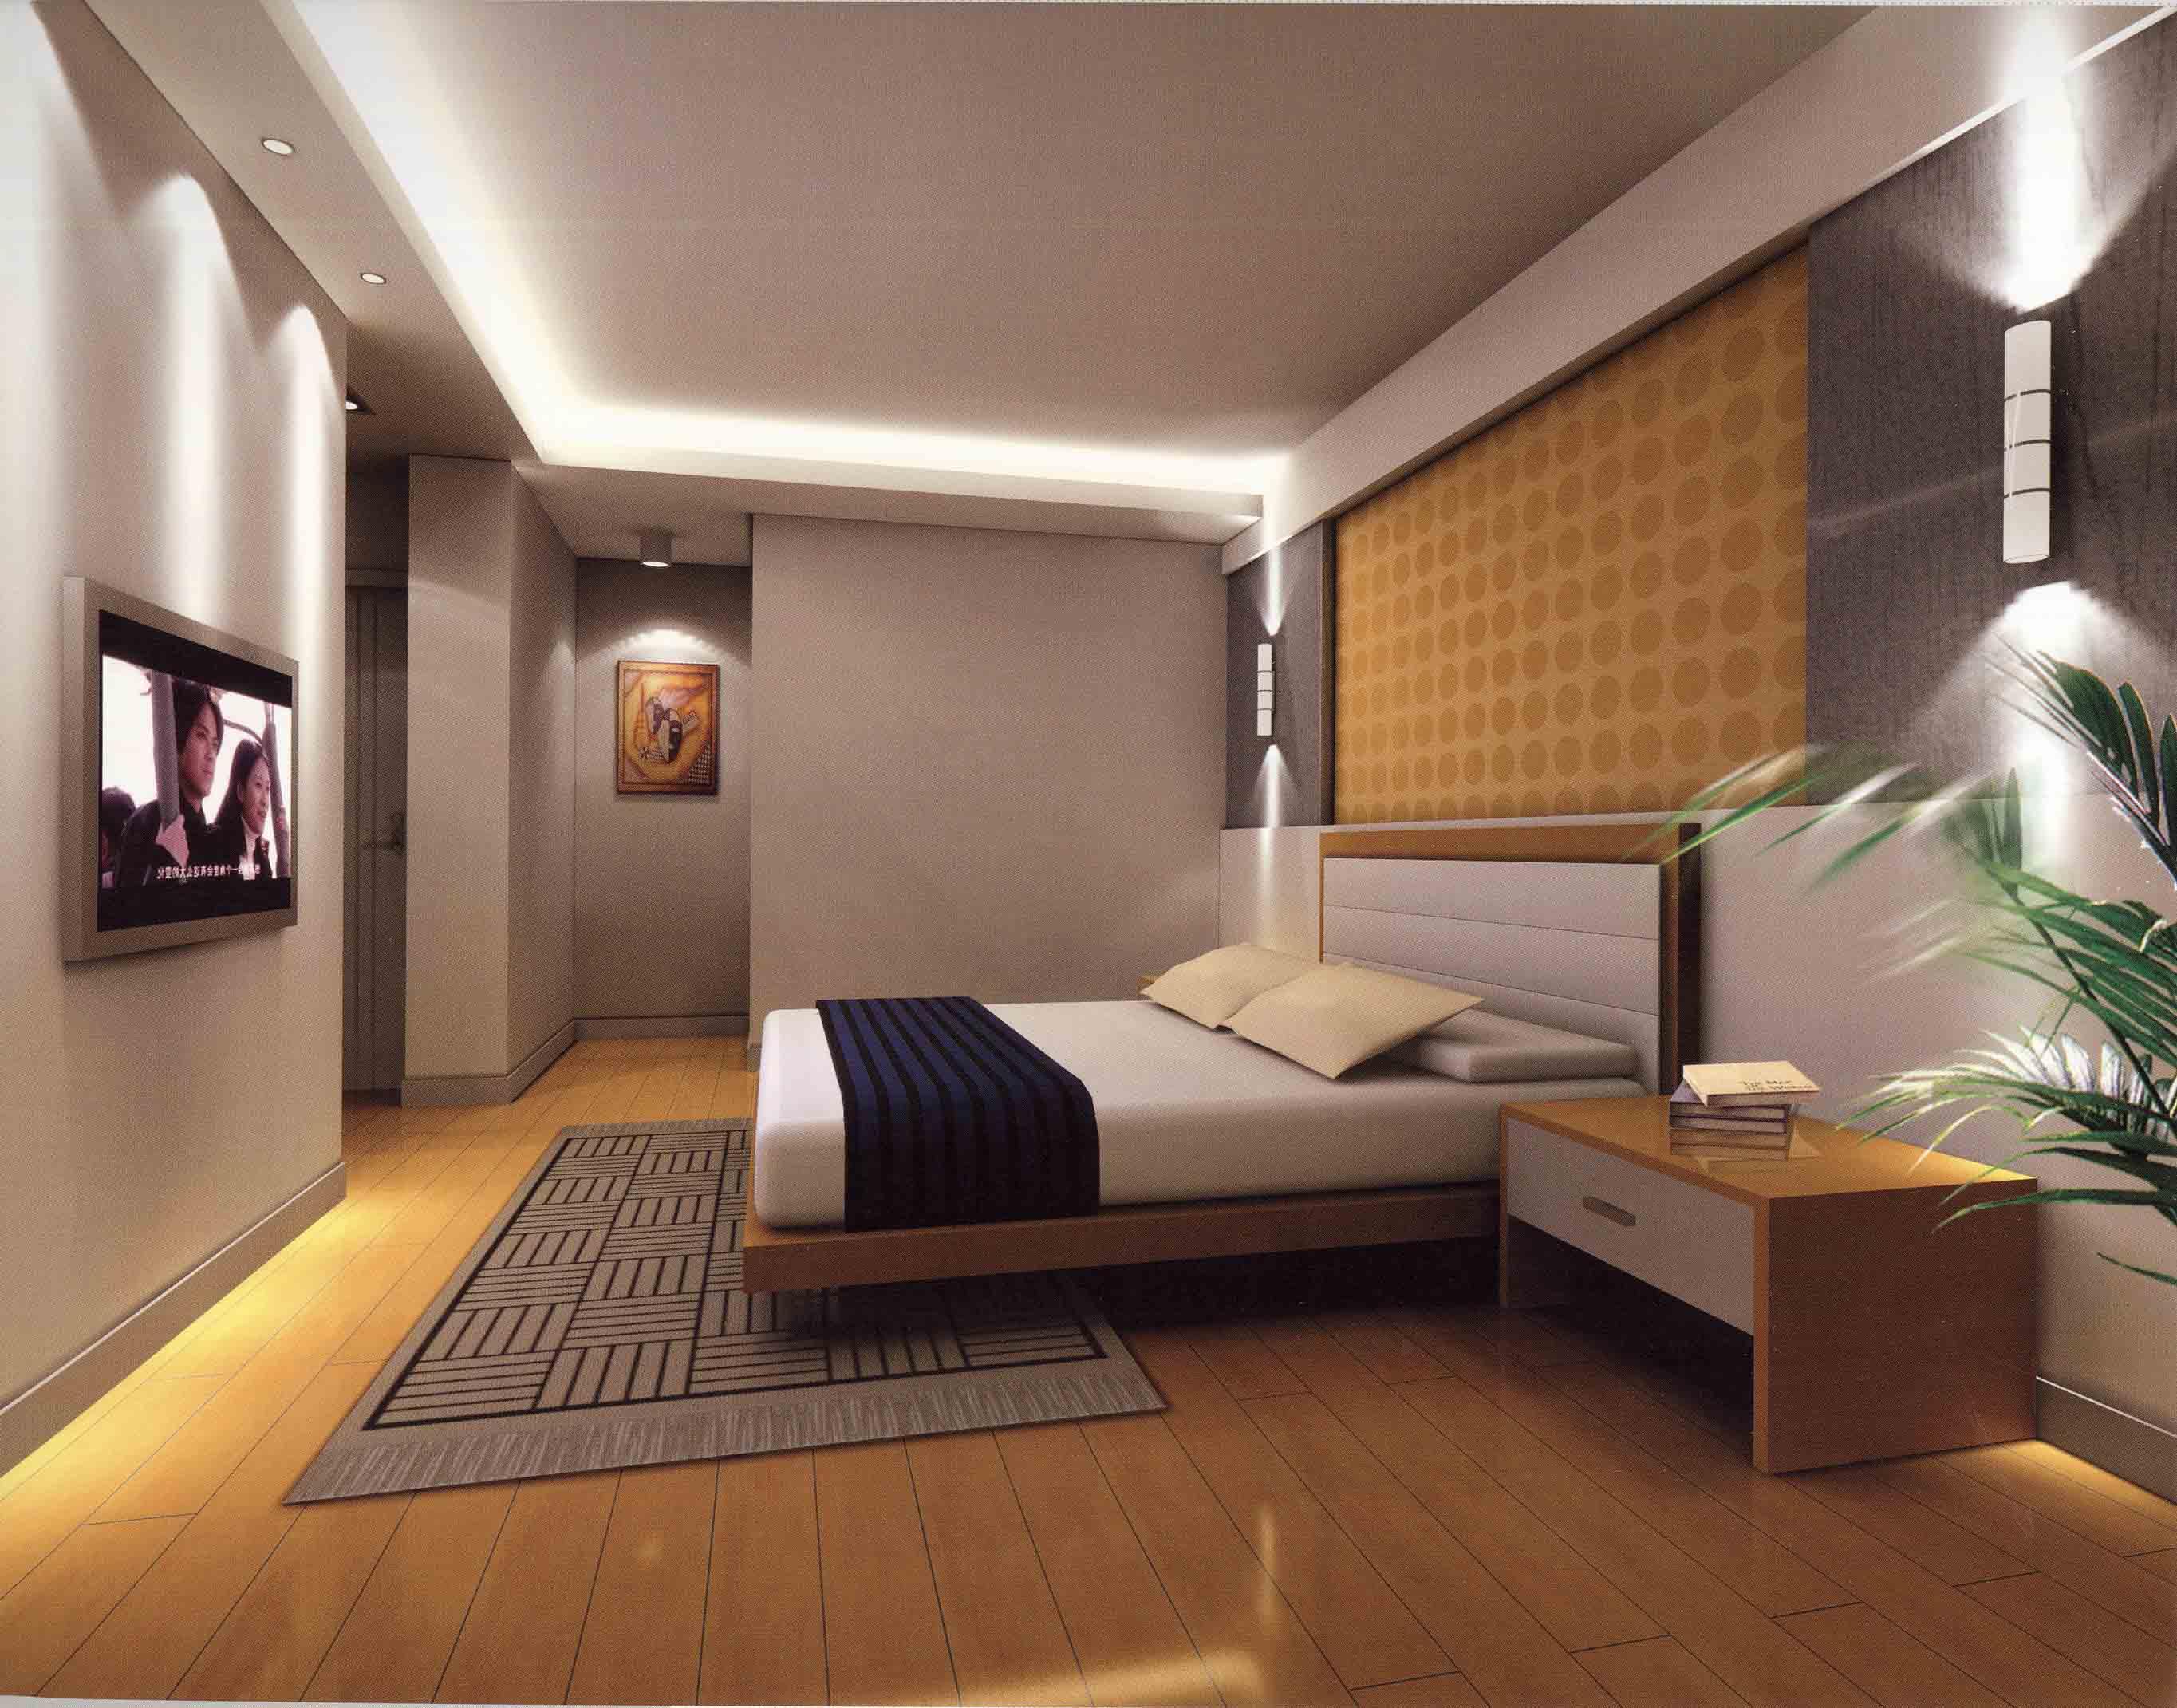 25 Cool Bedroom Designs Collection The WoW Style